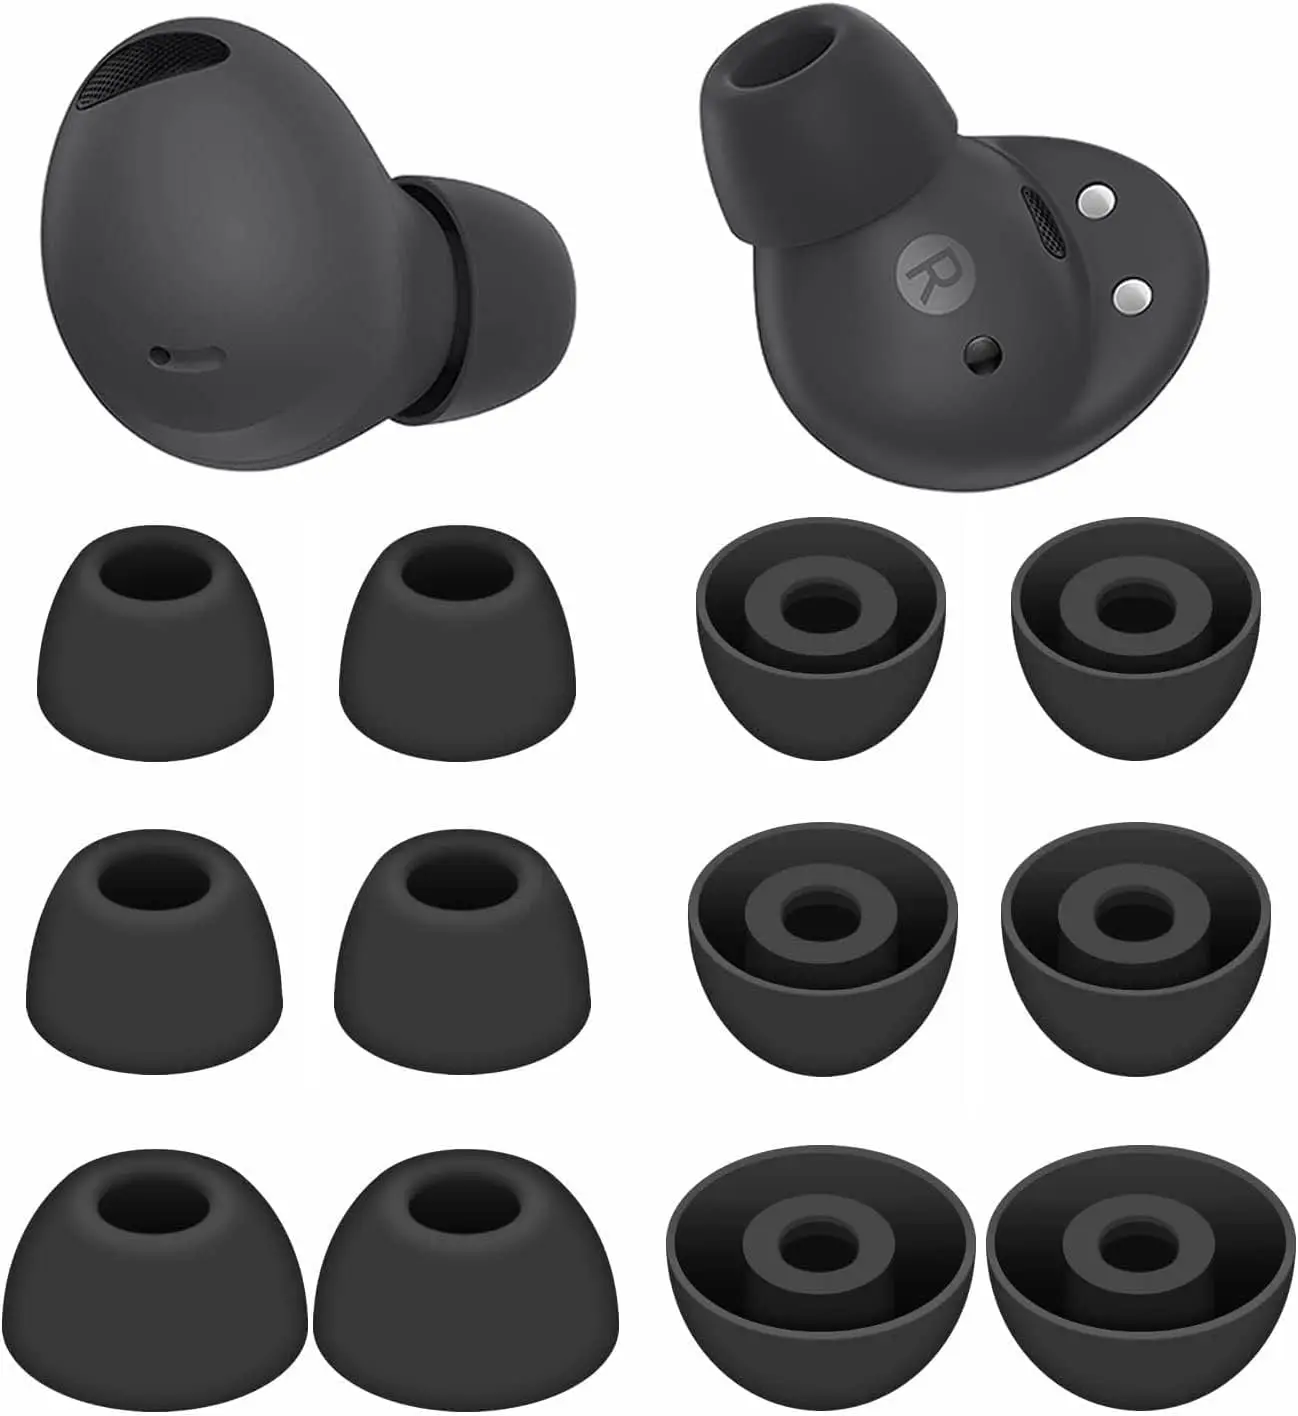 3Pairs Silicone Ear Tips for Samsung Galaxy buds 2 pro Earphone Eartips Earbuds Tips Case Accessory for Galaxy buds 2Pro